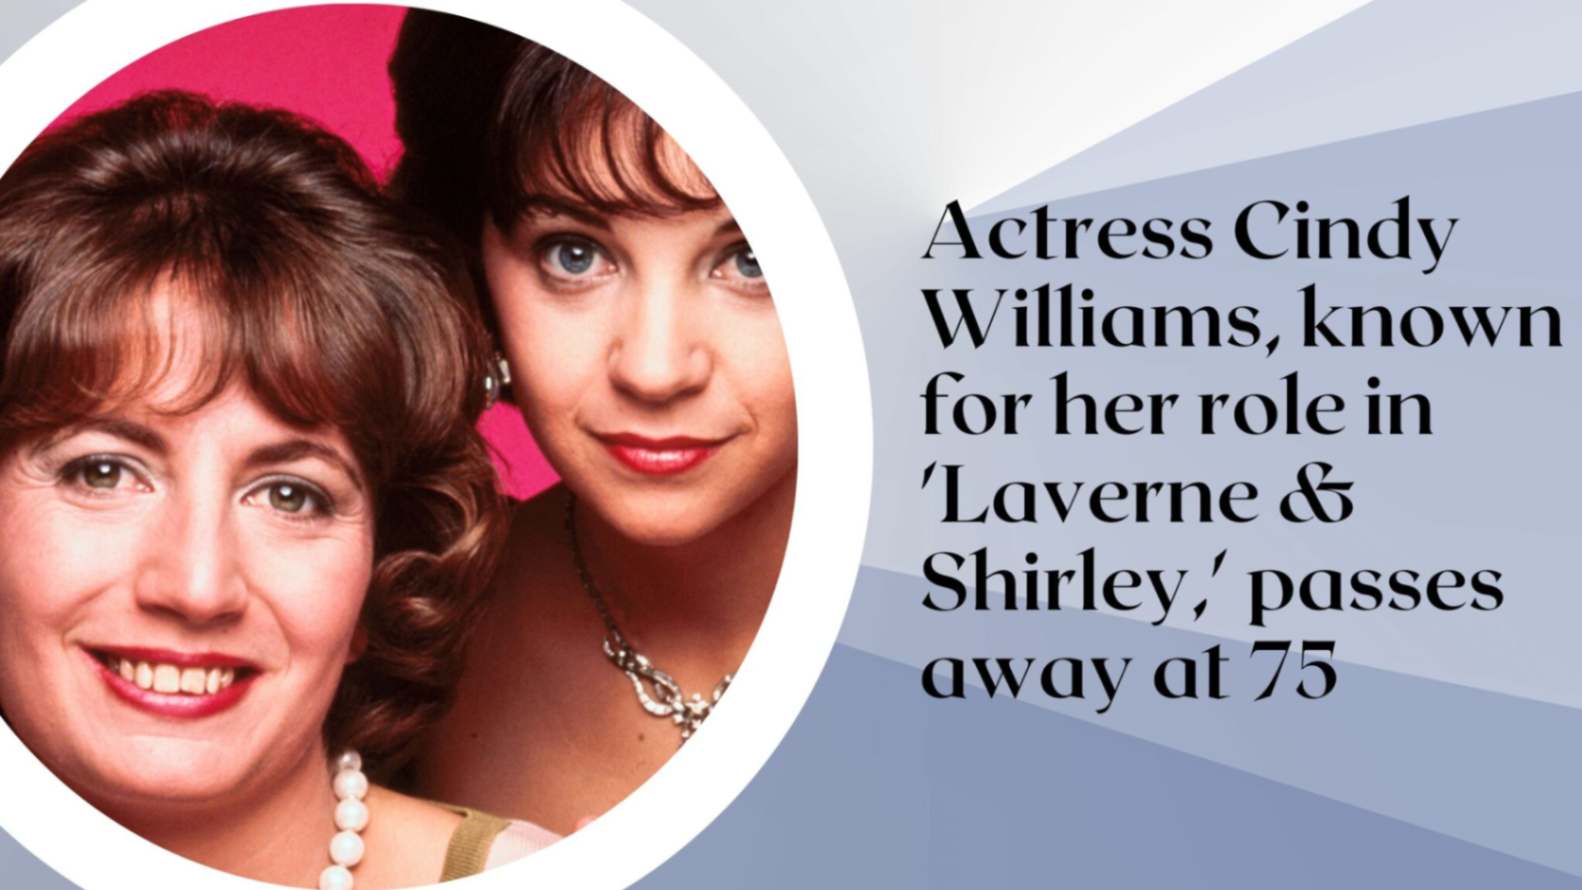 Actress Cindy Williams, known for her role in 'Laverne & Shirley,' passes away at 75